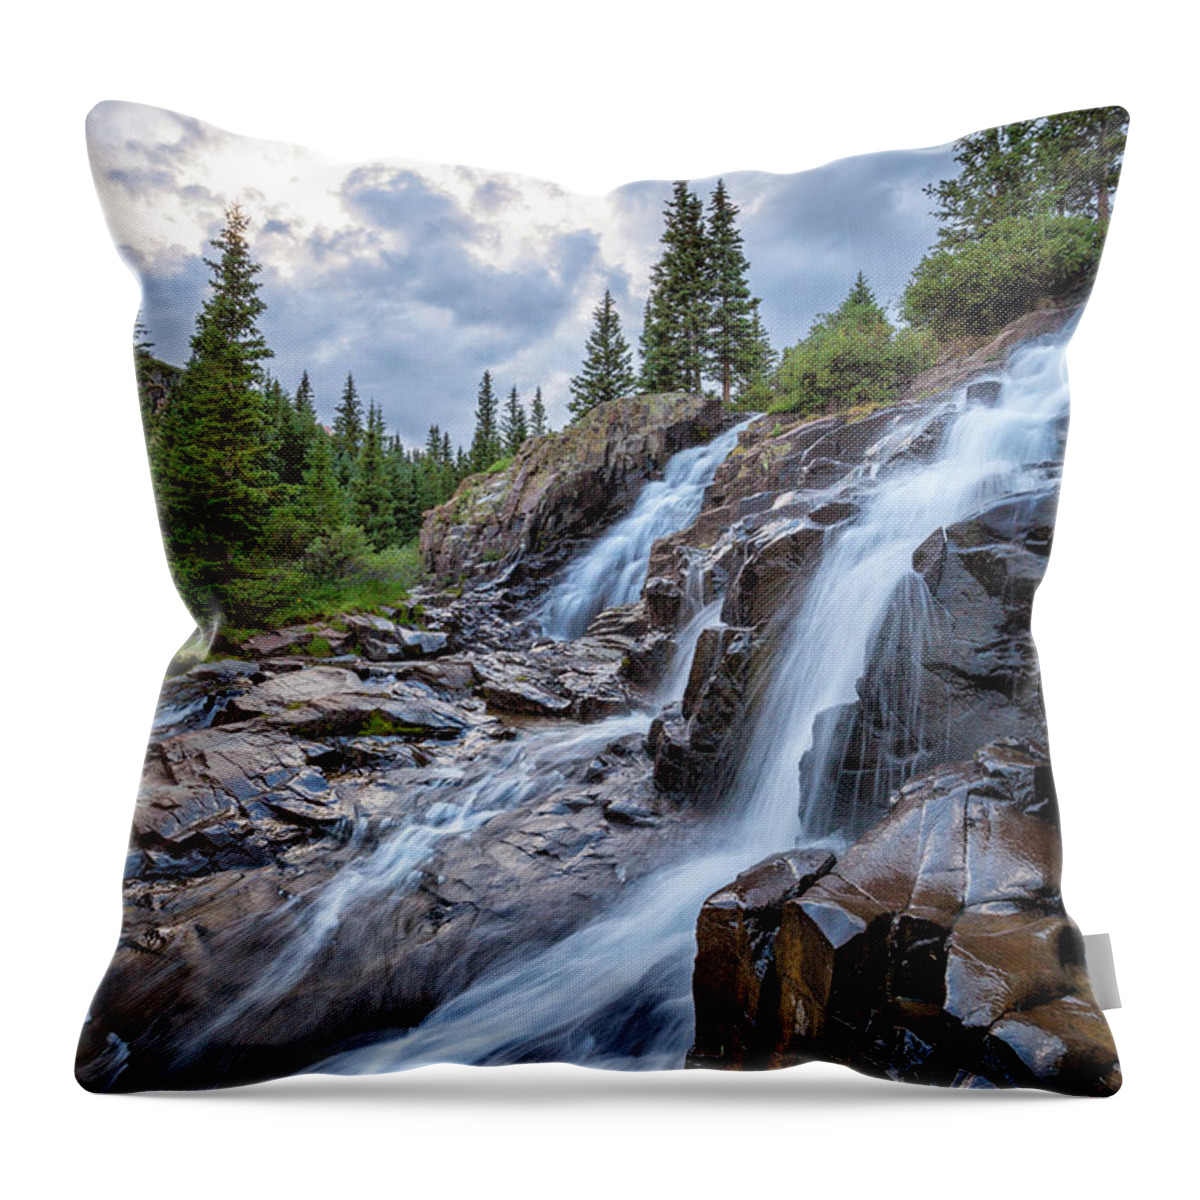 Waterfall Throw Pillow featuring the photograph Twin Falls At Sundown by Denise Bush